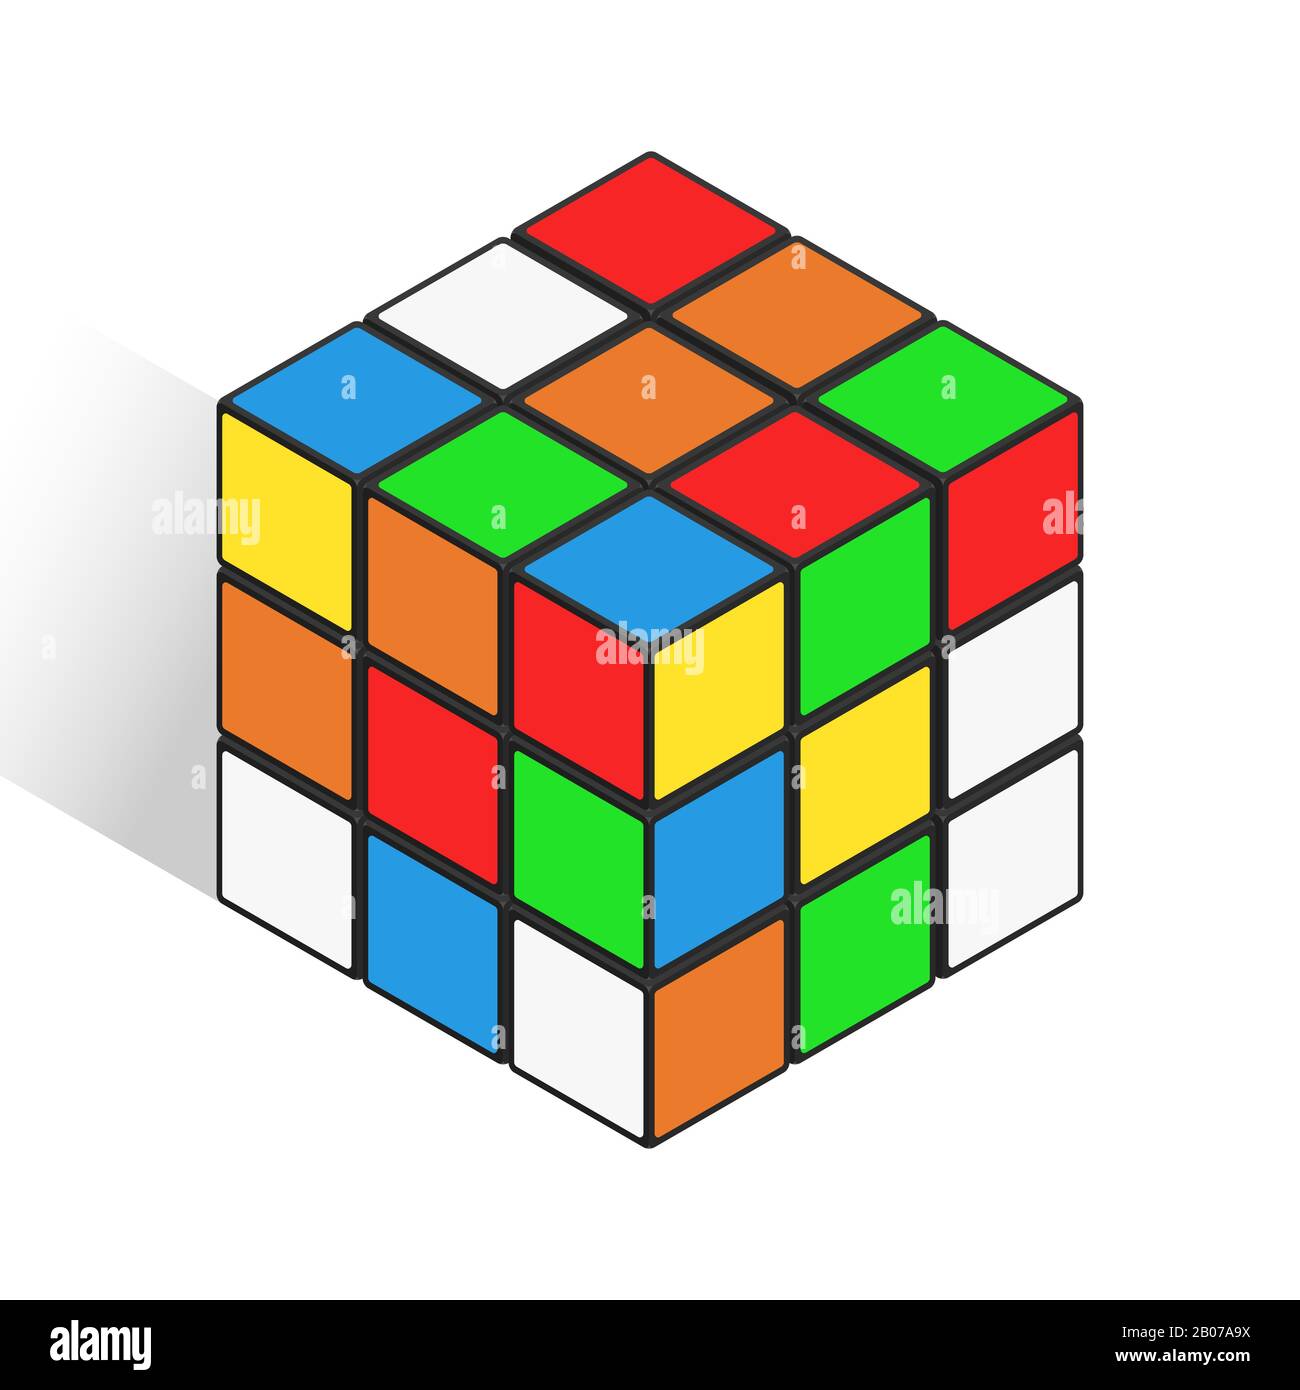 Isometric logic cube toy vector icon similar rubik cube. Color toy square object with logical construction illustration Stock Vector